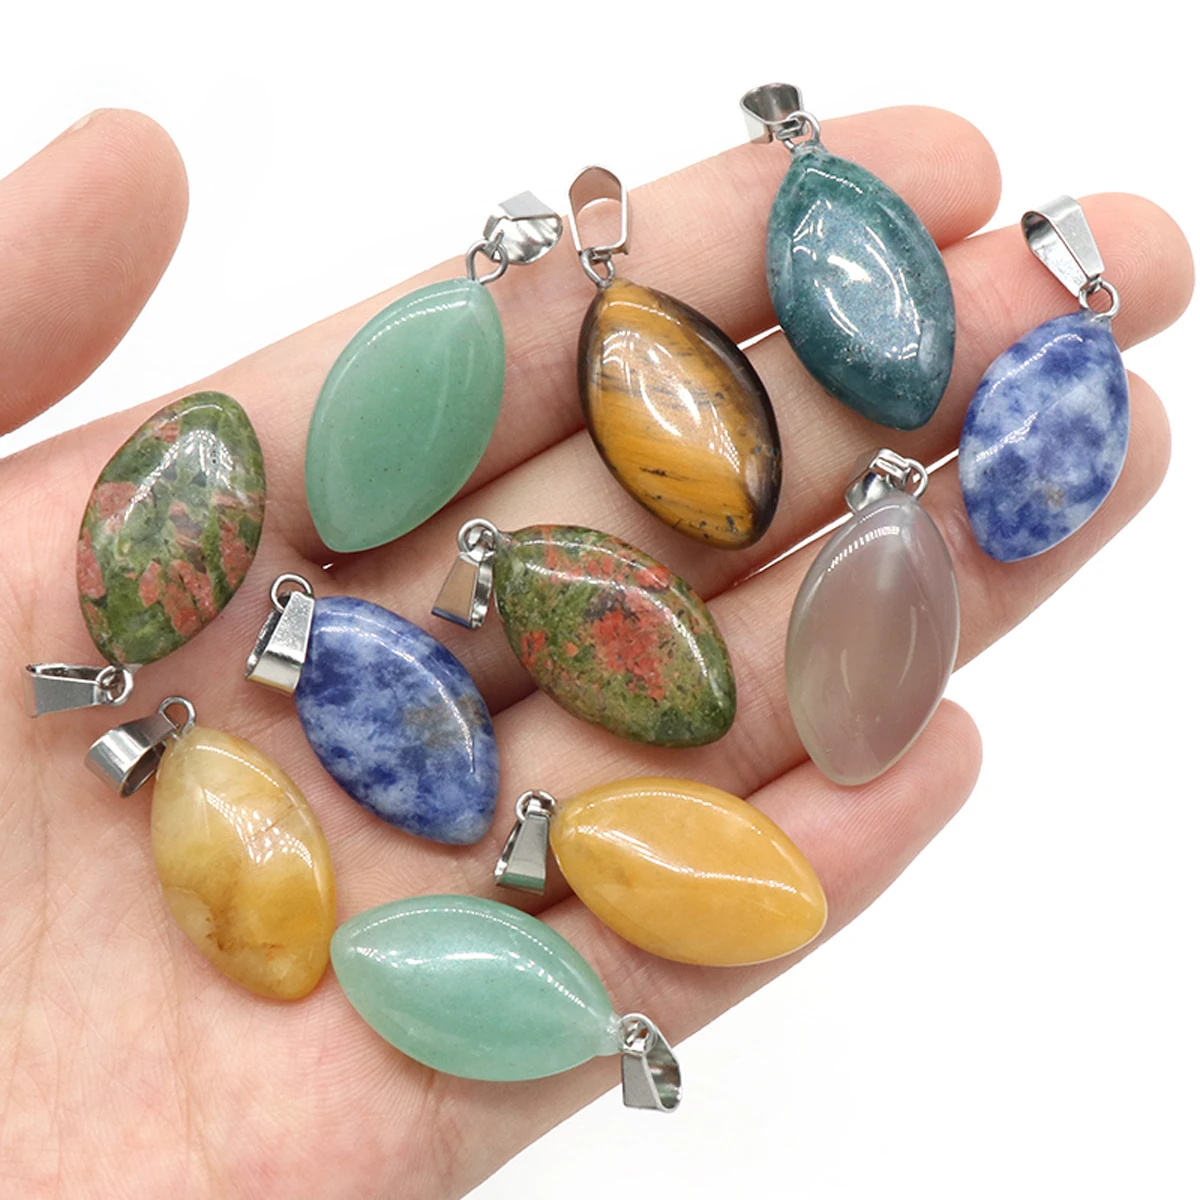 

4PC Natural Stone Pendant Tiger Eye Stone Opal Agate Sodalite Healing Crystals Charms for Jewelry Making DIY Necklace Earrings